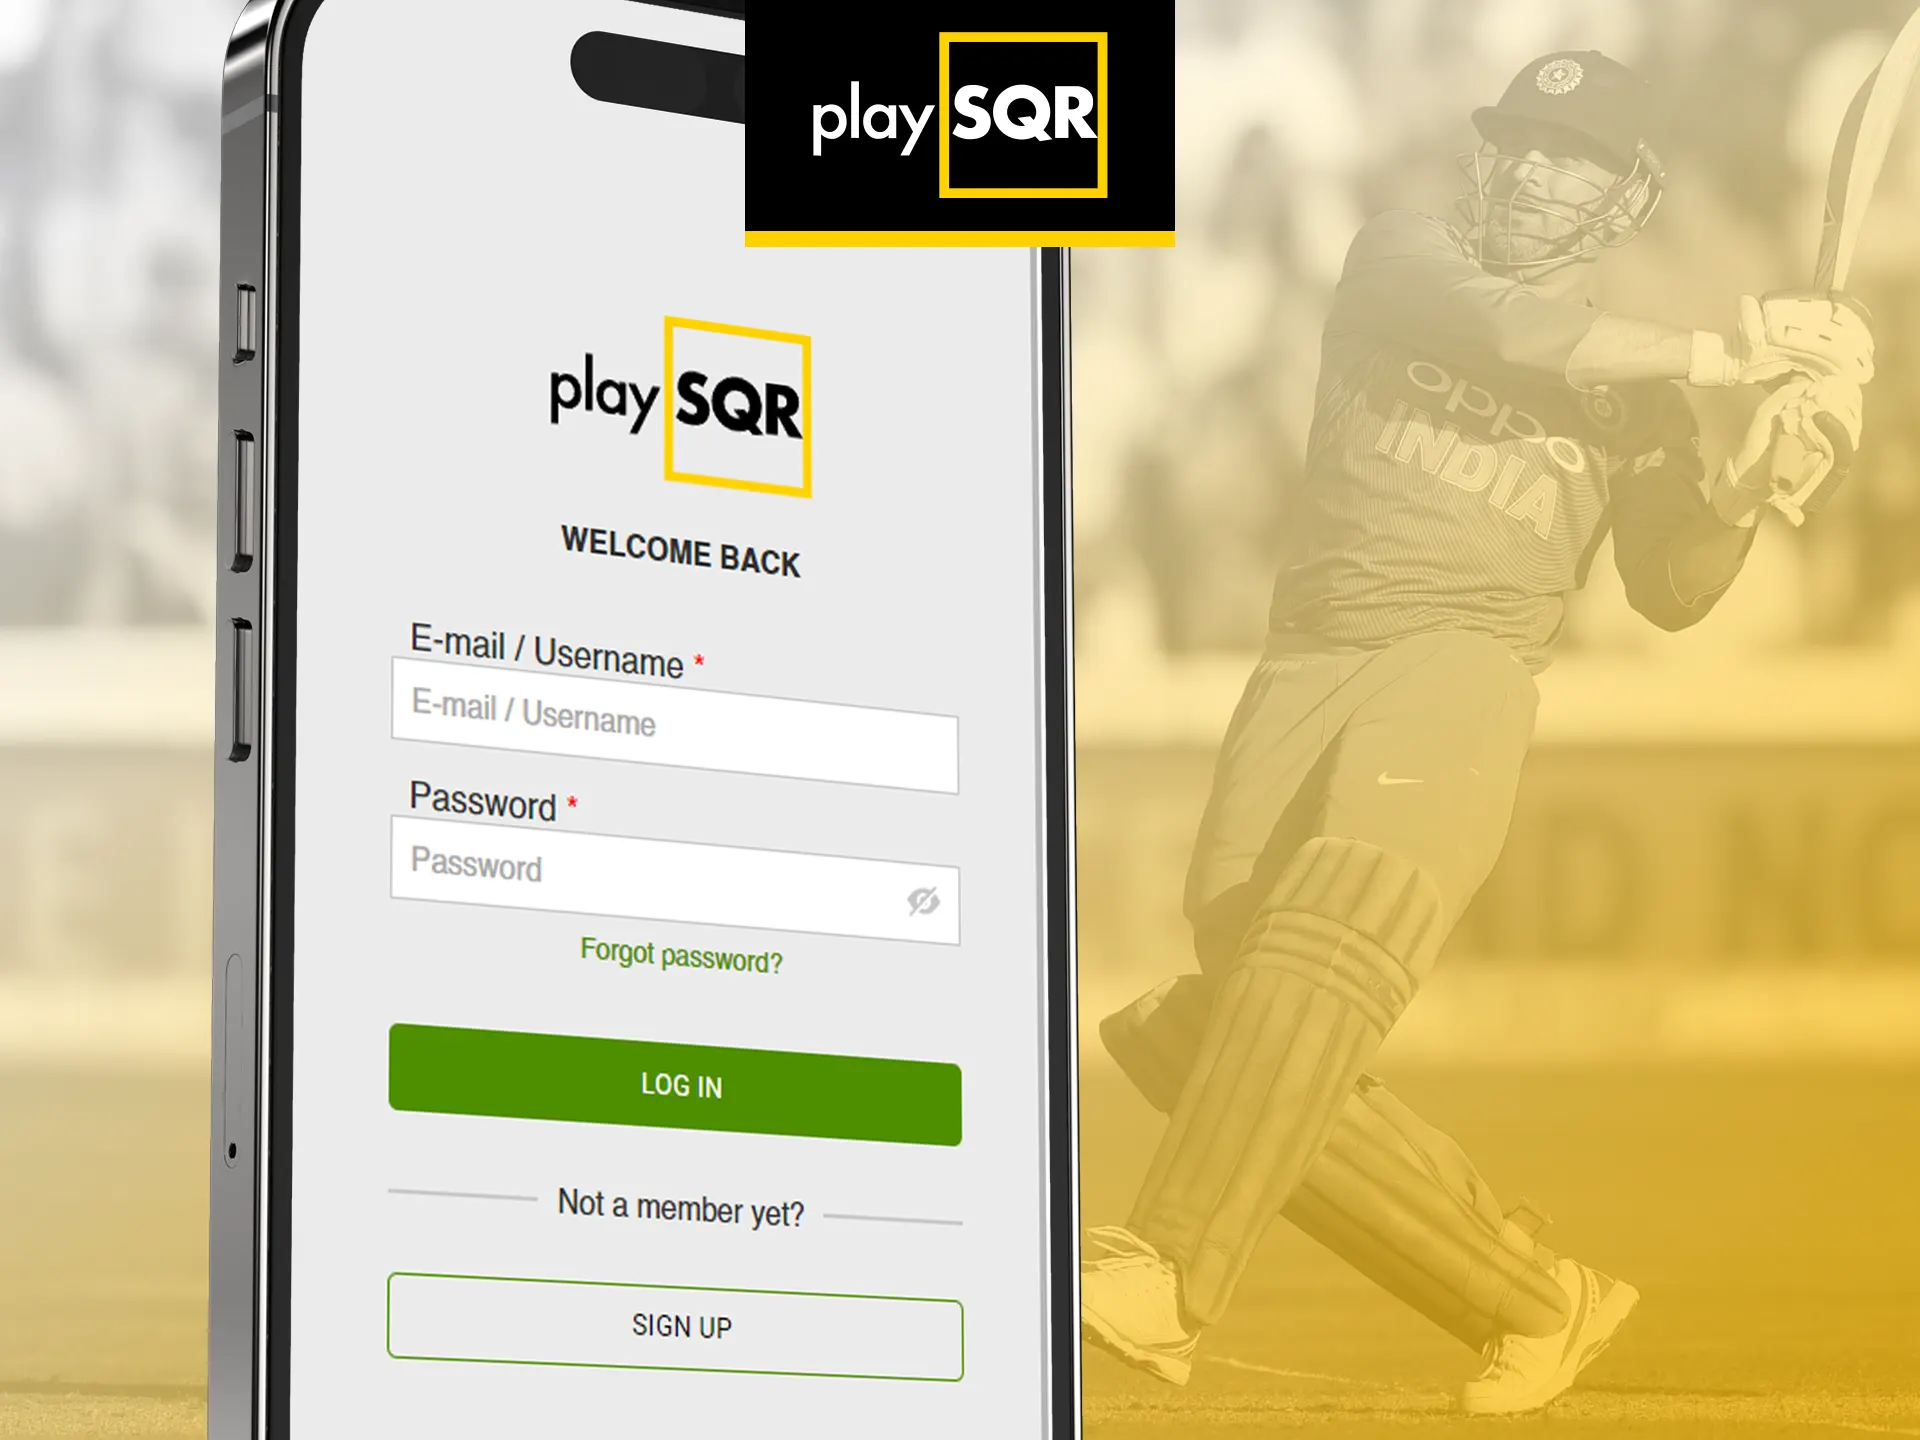 Enter your password and email address to log in to your PlaySQR app account.